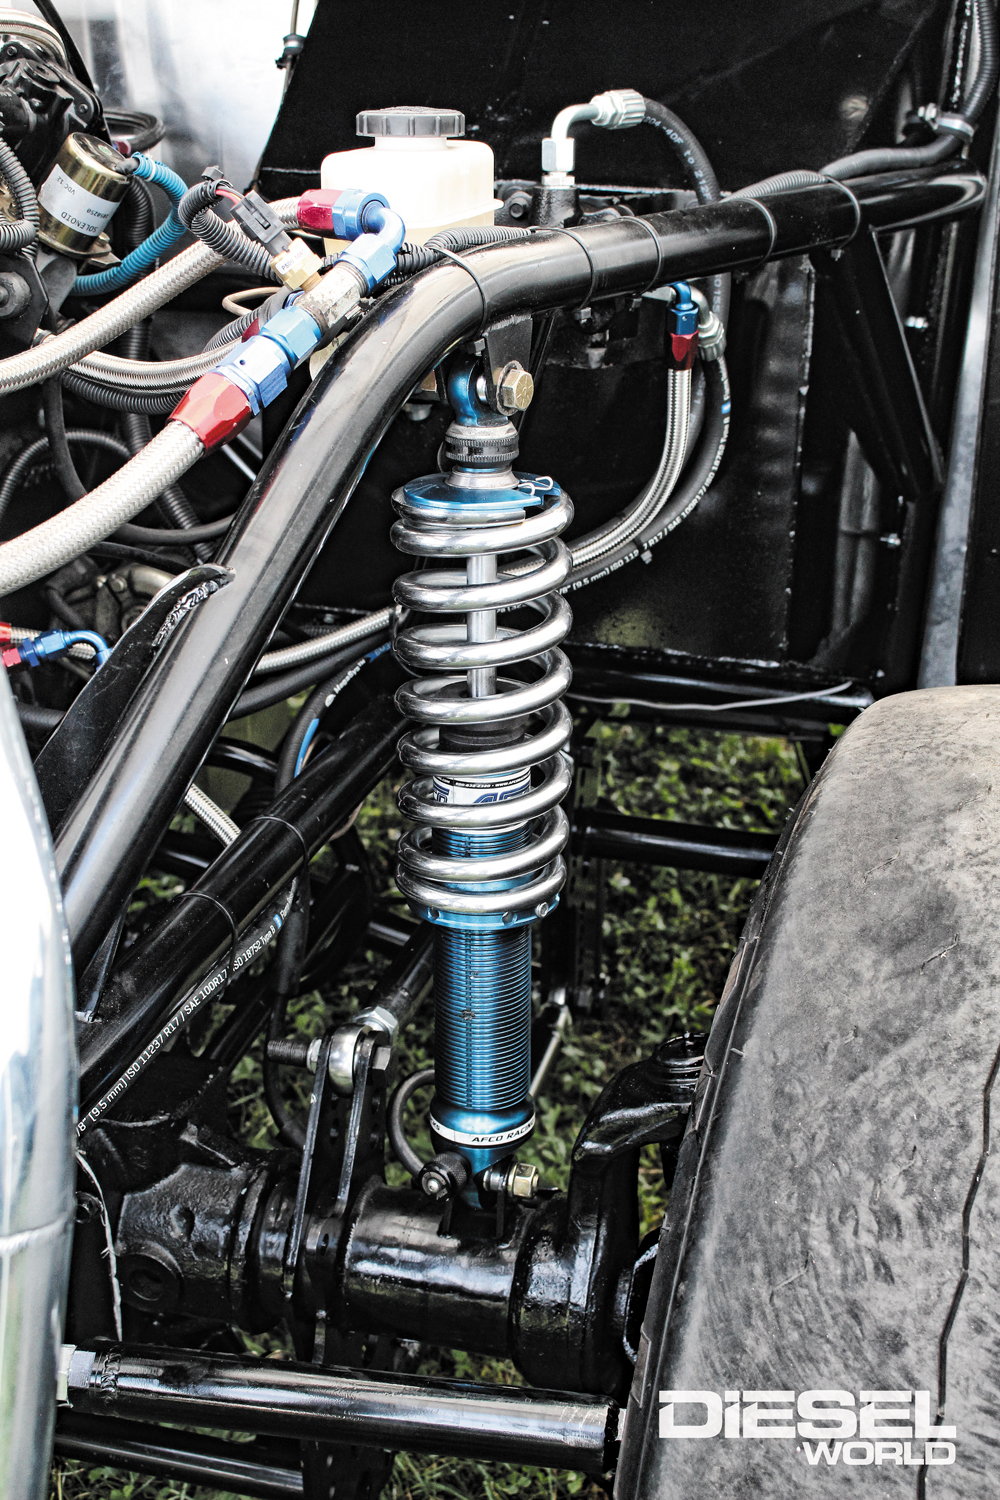 AFCO coil over shocks tie the chassis in with the axles and feature double-adjustability